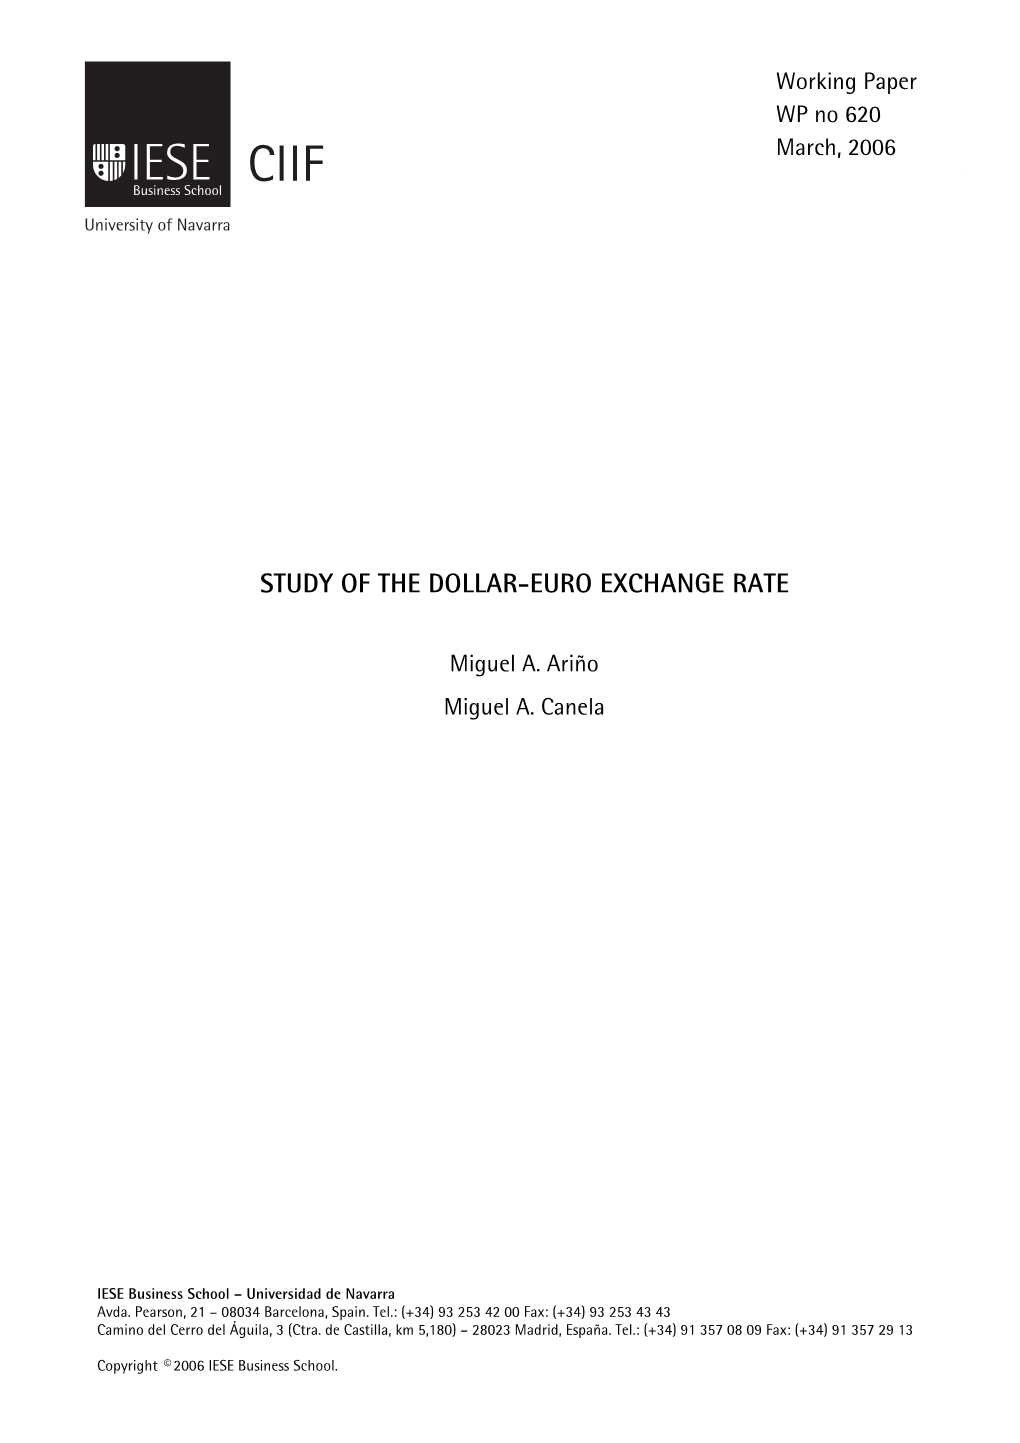 Study of the Dollar-Euro Exchange Rate